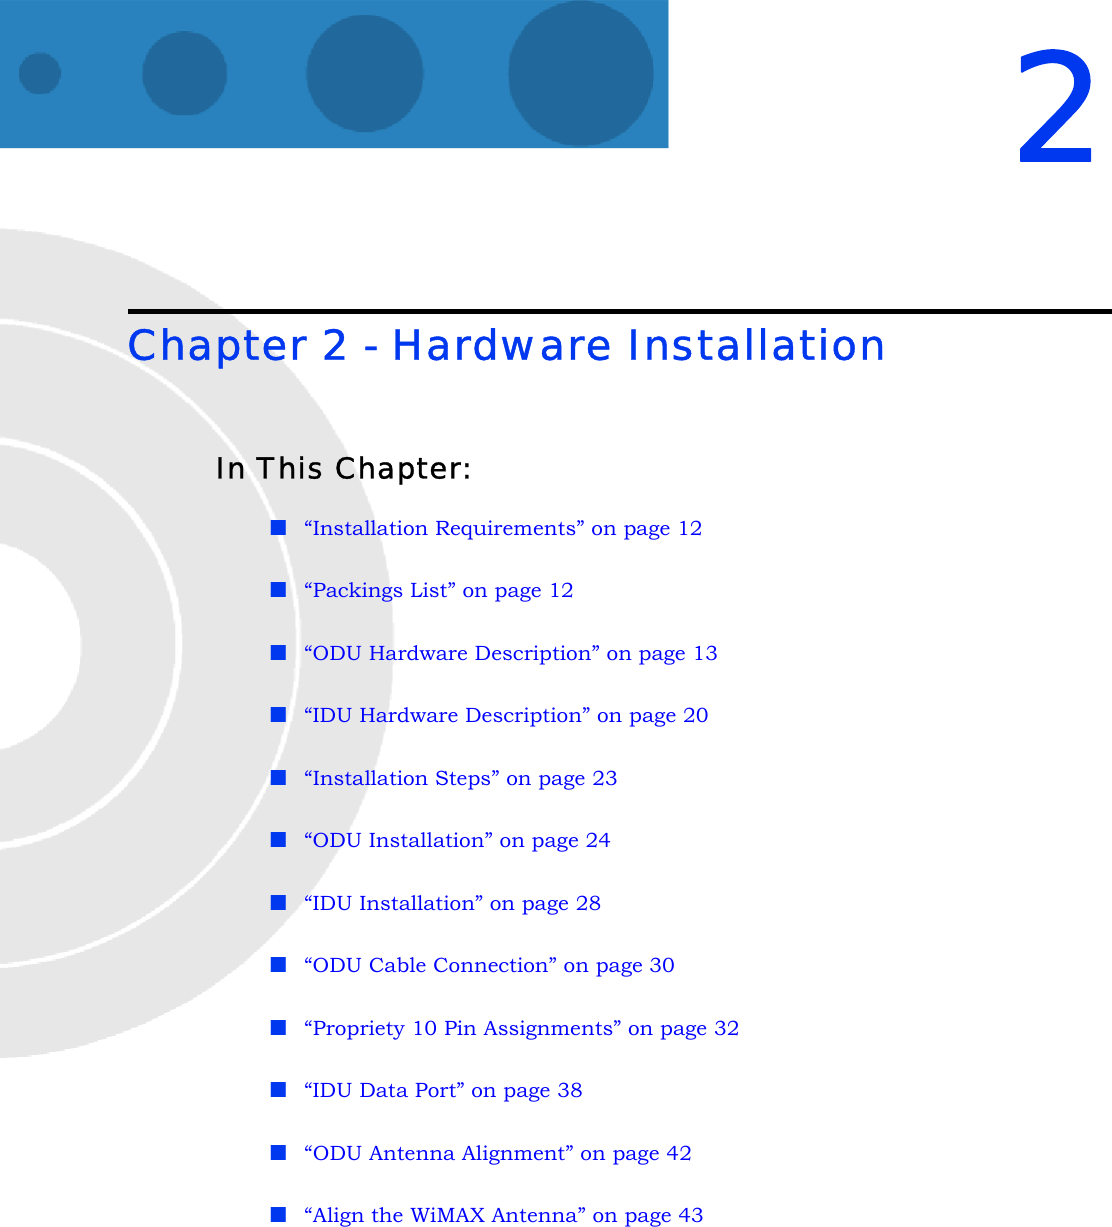 2Chapter 2 - Hardware InstallationIn This Chapter:“Installation Requirements” on page 12“Packings List” on page 12“ODU Hardware Description” on page 13“IDU Hardware Description” on page 20“Installation Steps” on page 23“ODU Installation” on page 24“IDU Installation” on page 28“ODU Cable Connection” on page 30“Propriety 10 Pin Assignments” on page 32“IDU Data Port” on page 38“ODU Antenna Alignment” on page 42“Align the WiMAX Antenna” on page 43